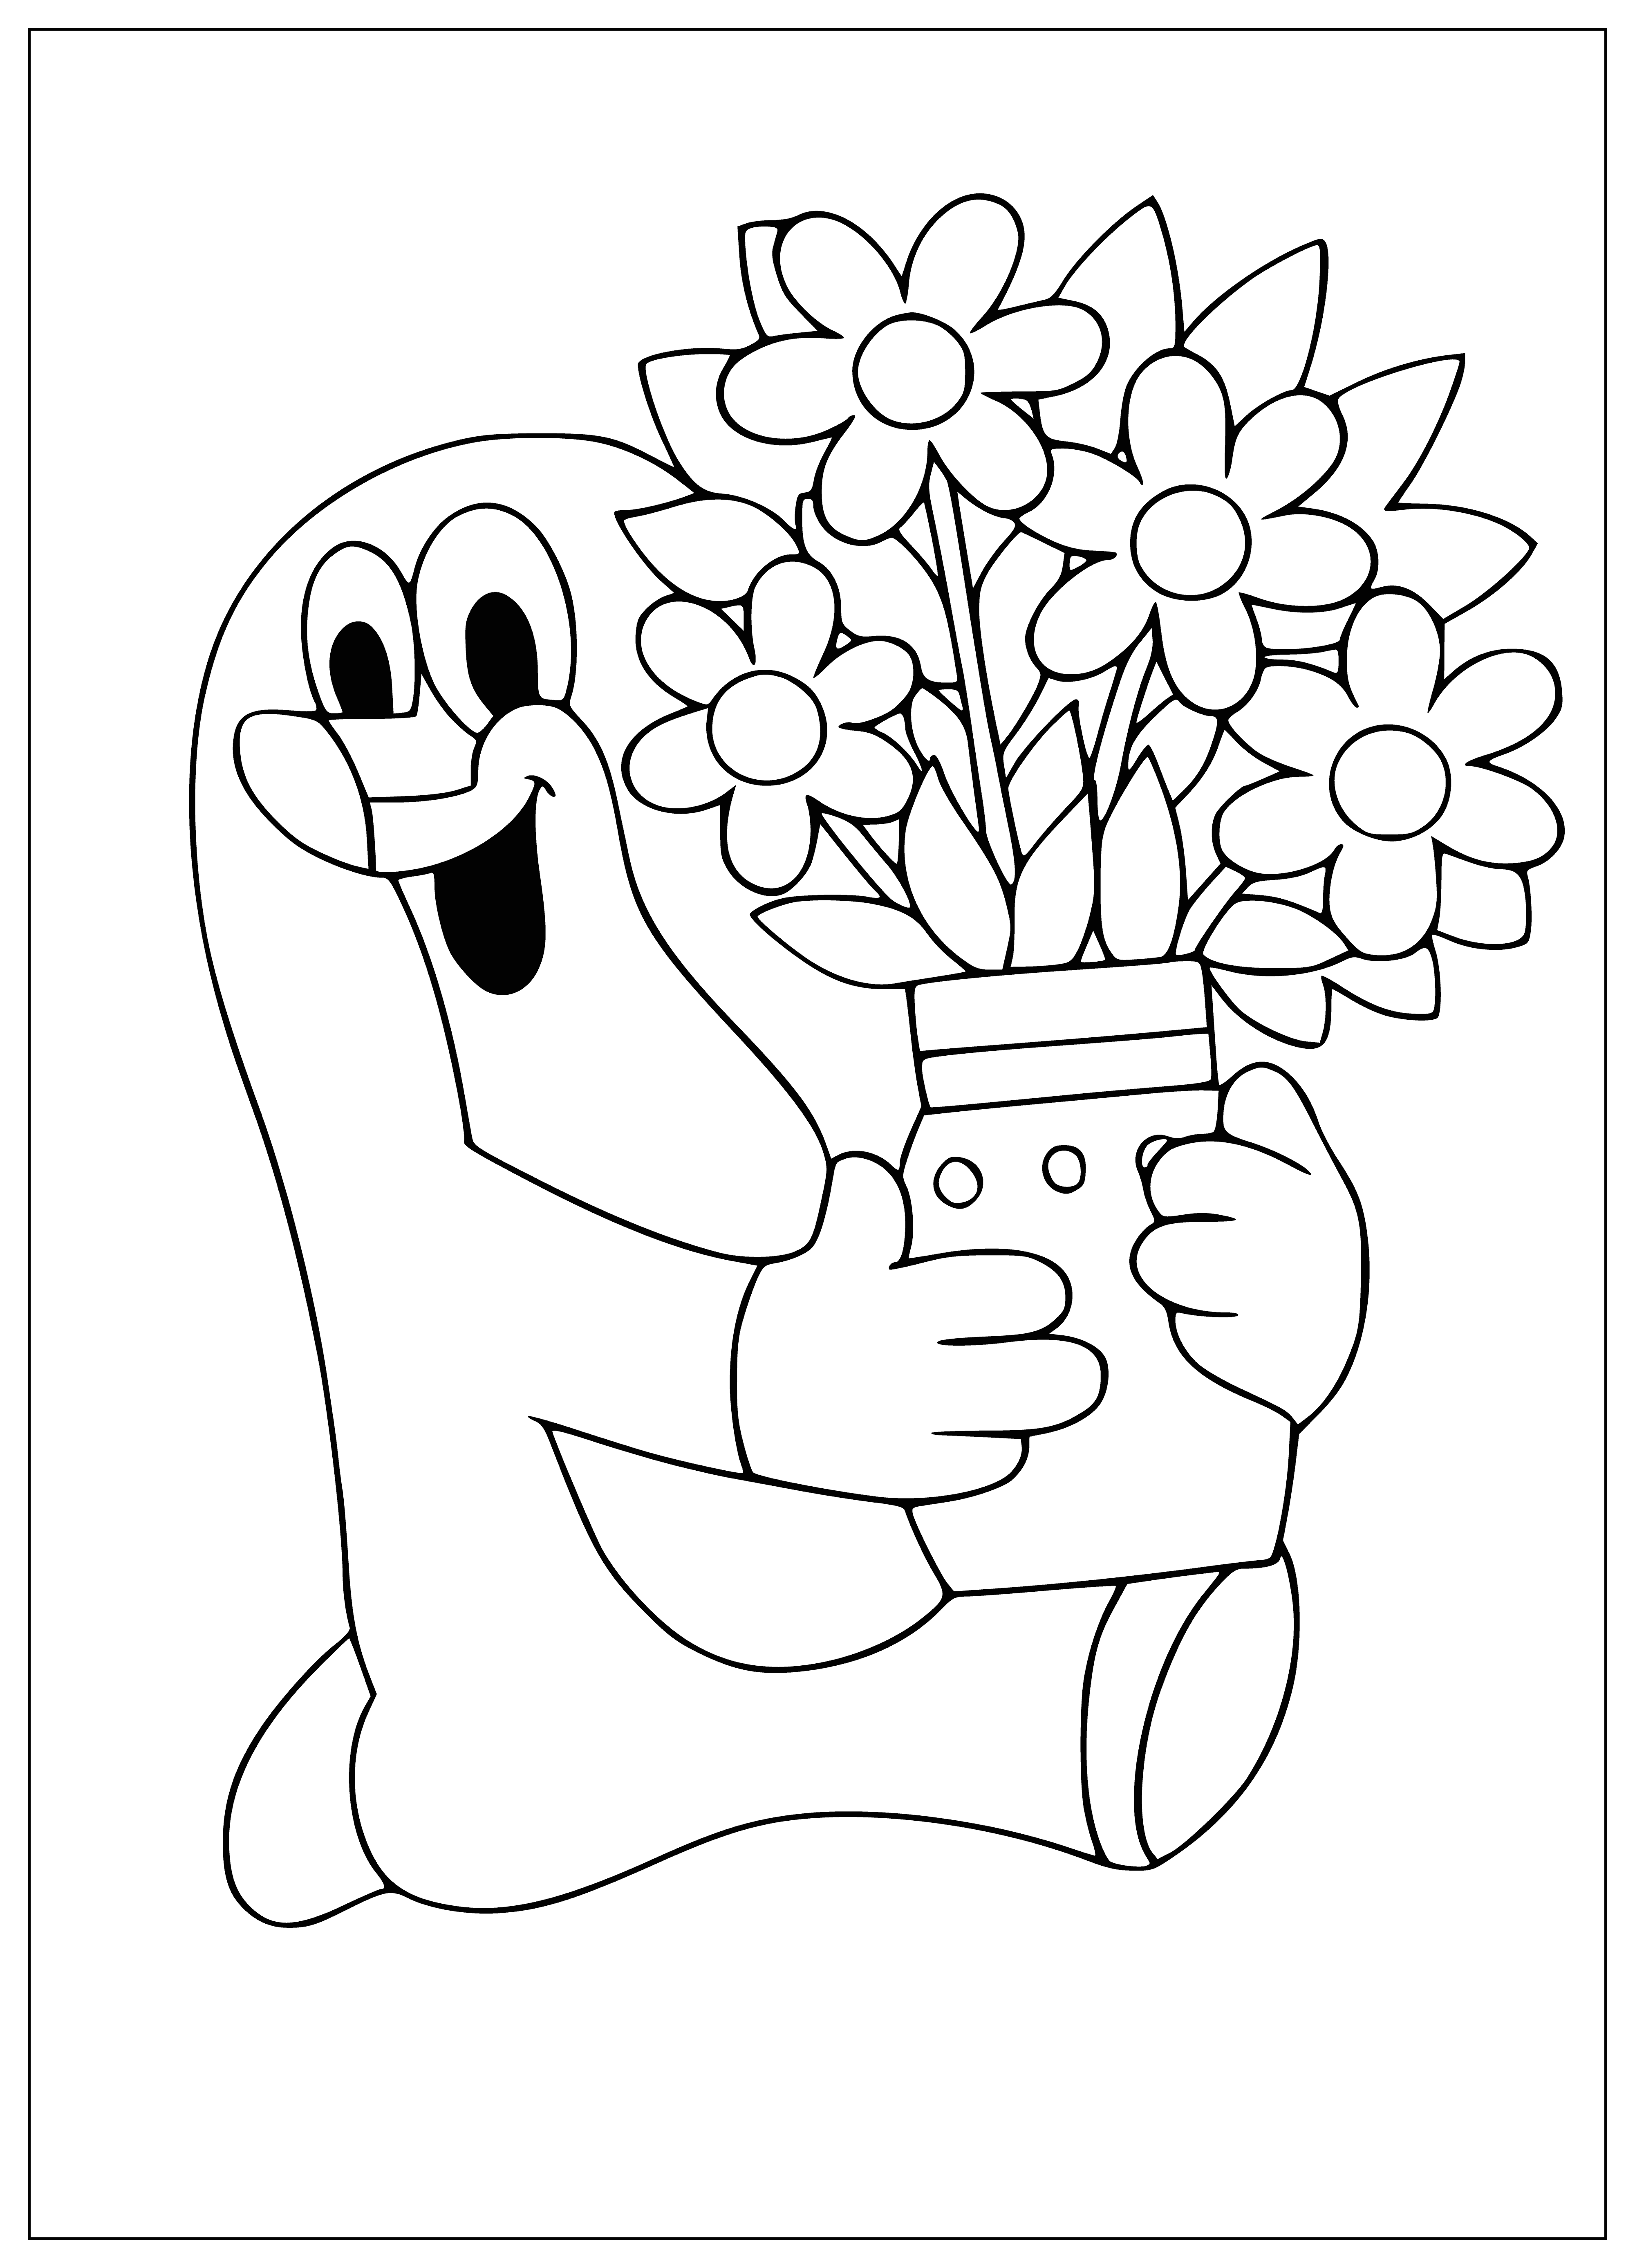 coloring page: Krtek, a tiny cartoon mole, unearths a vase & looks at it through his eye.